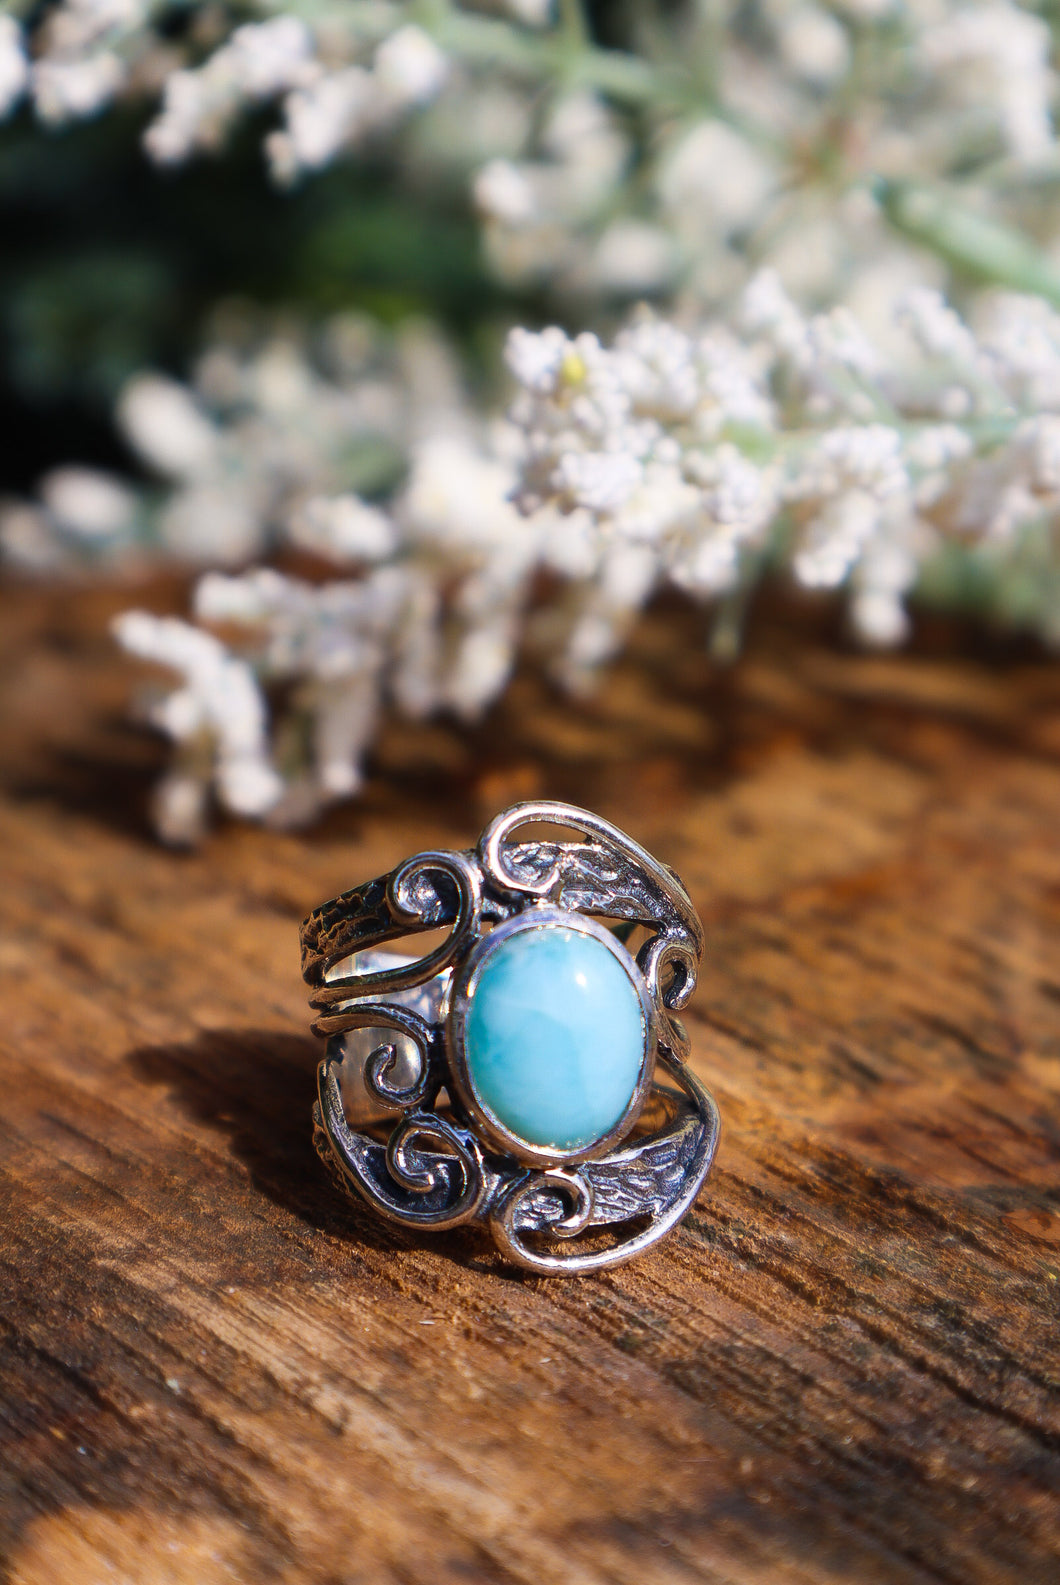 Handmade sterling silver swirl design ring with larimar stone -Front View